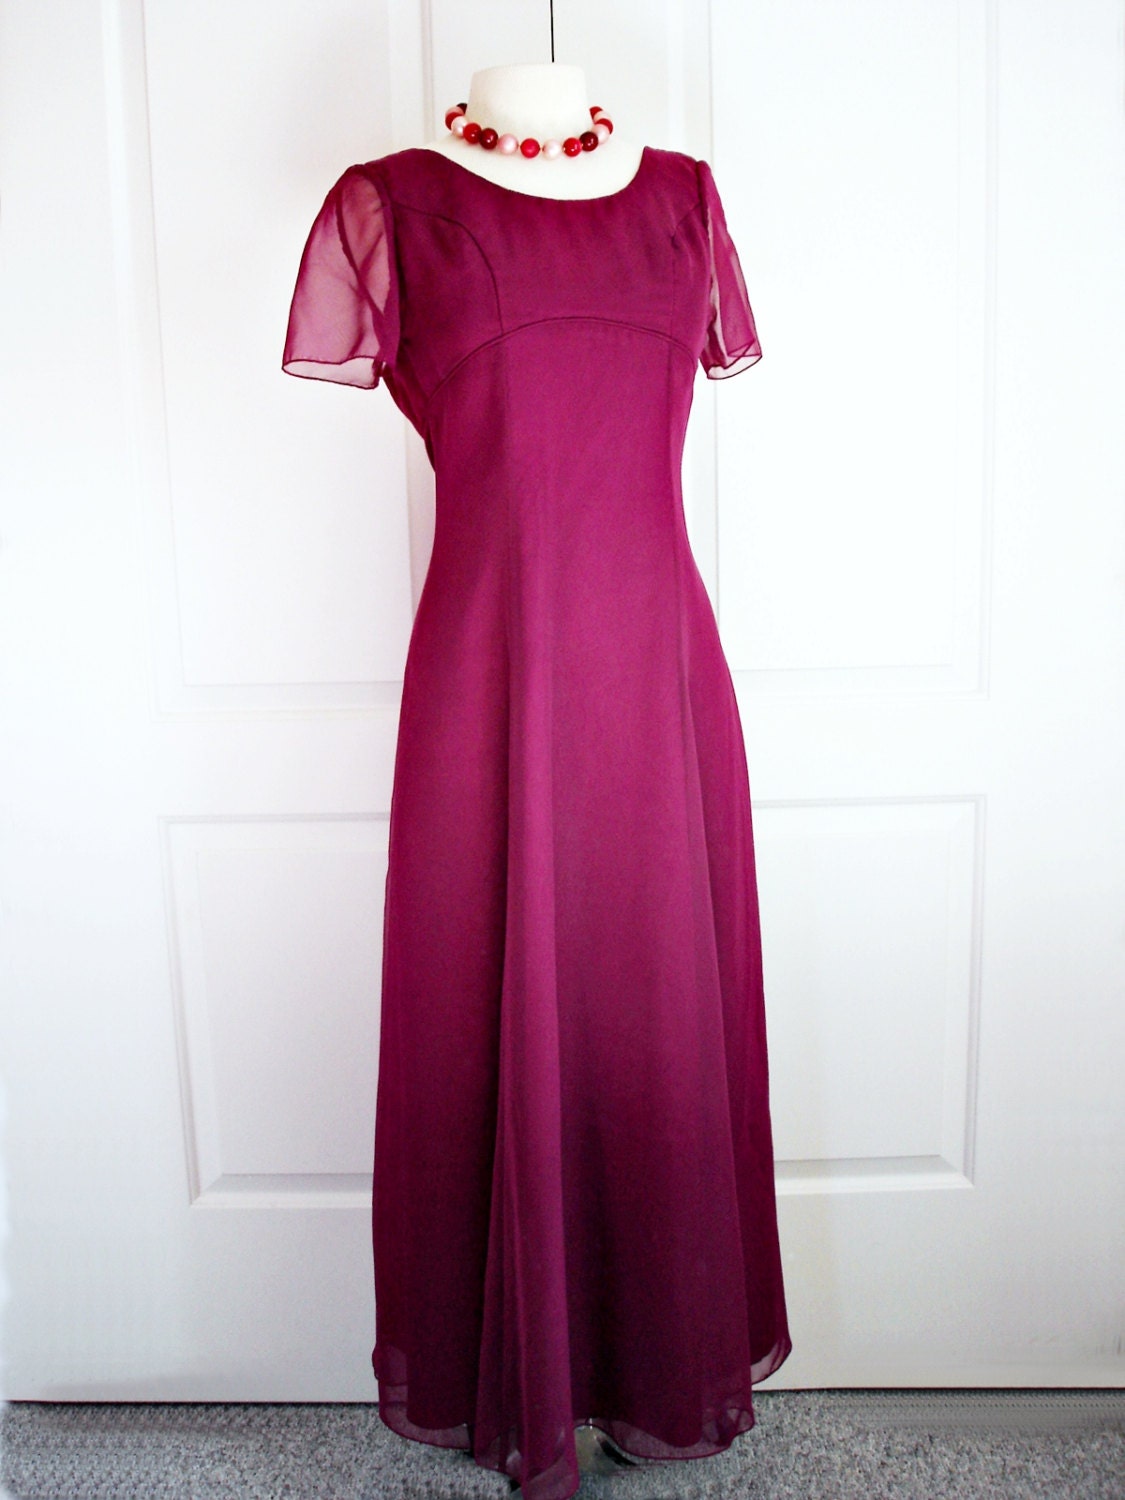 Vintage 80s party dress/ marsala red gown/ chiffon overlay/